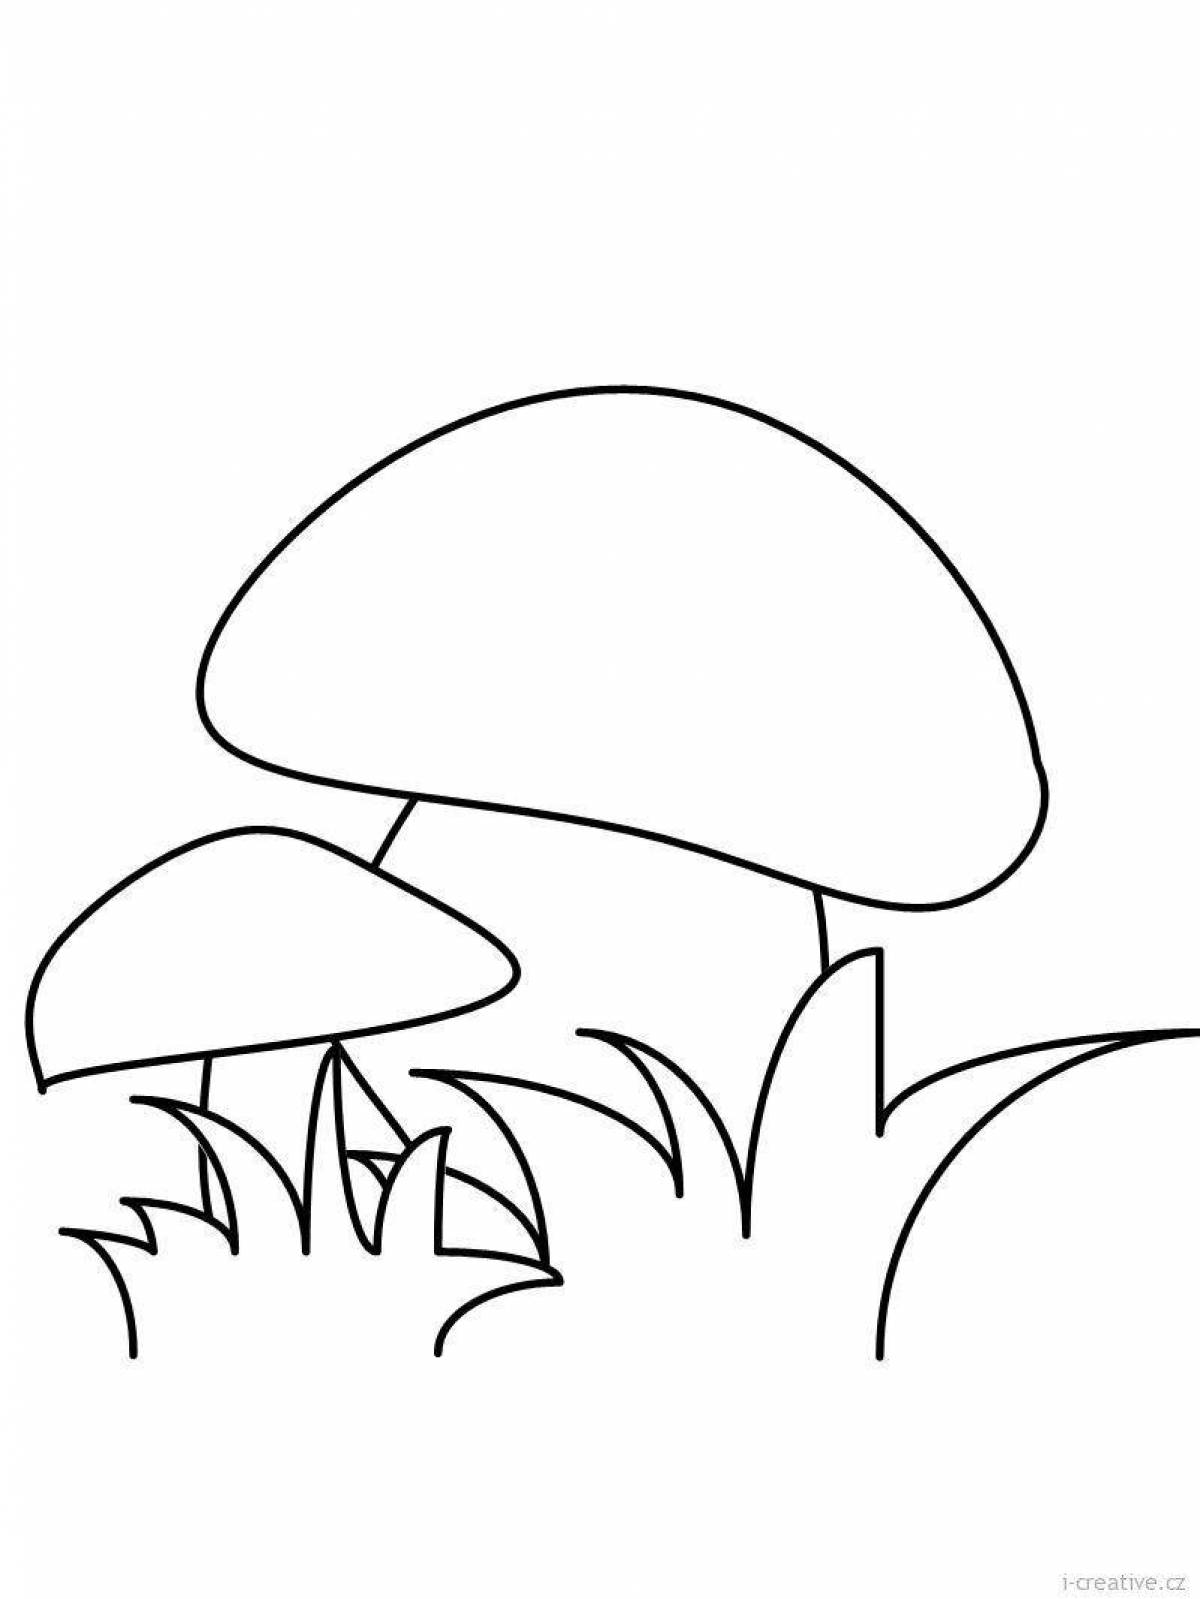 Glowing fungus coloring page